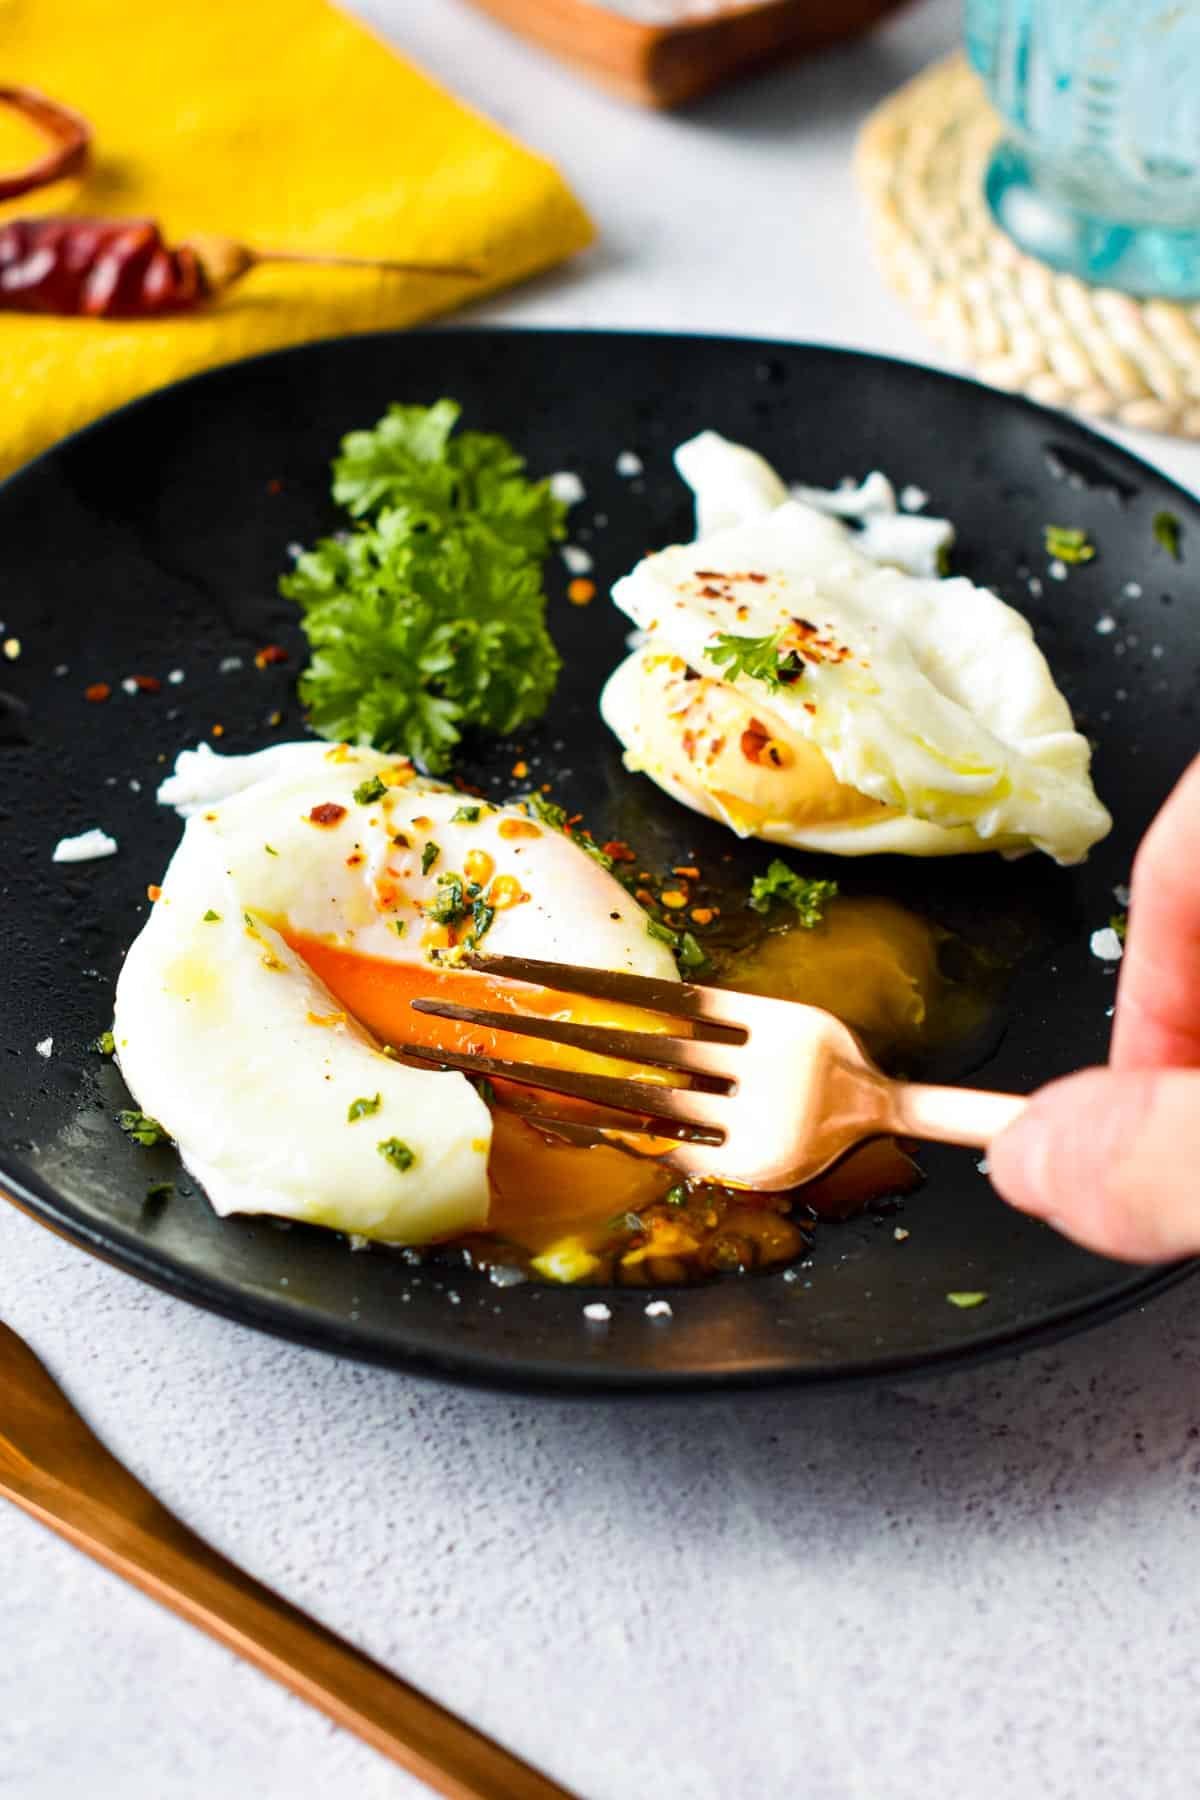 Learn How to Make Poached Eggs that are perfect every time with this simple poached egg recipe. Plus, this step by step instructions are easy to follow and required minimal kitchen skills to starts.